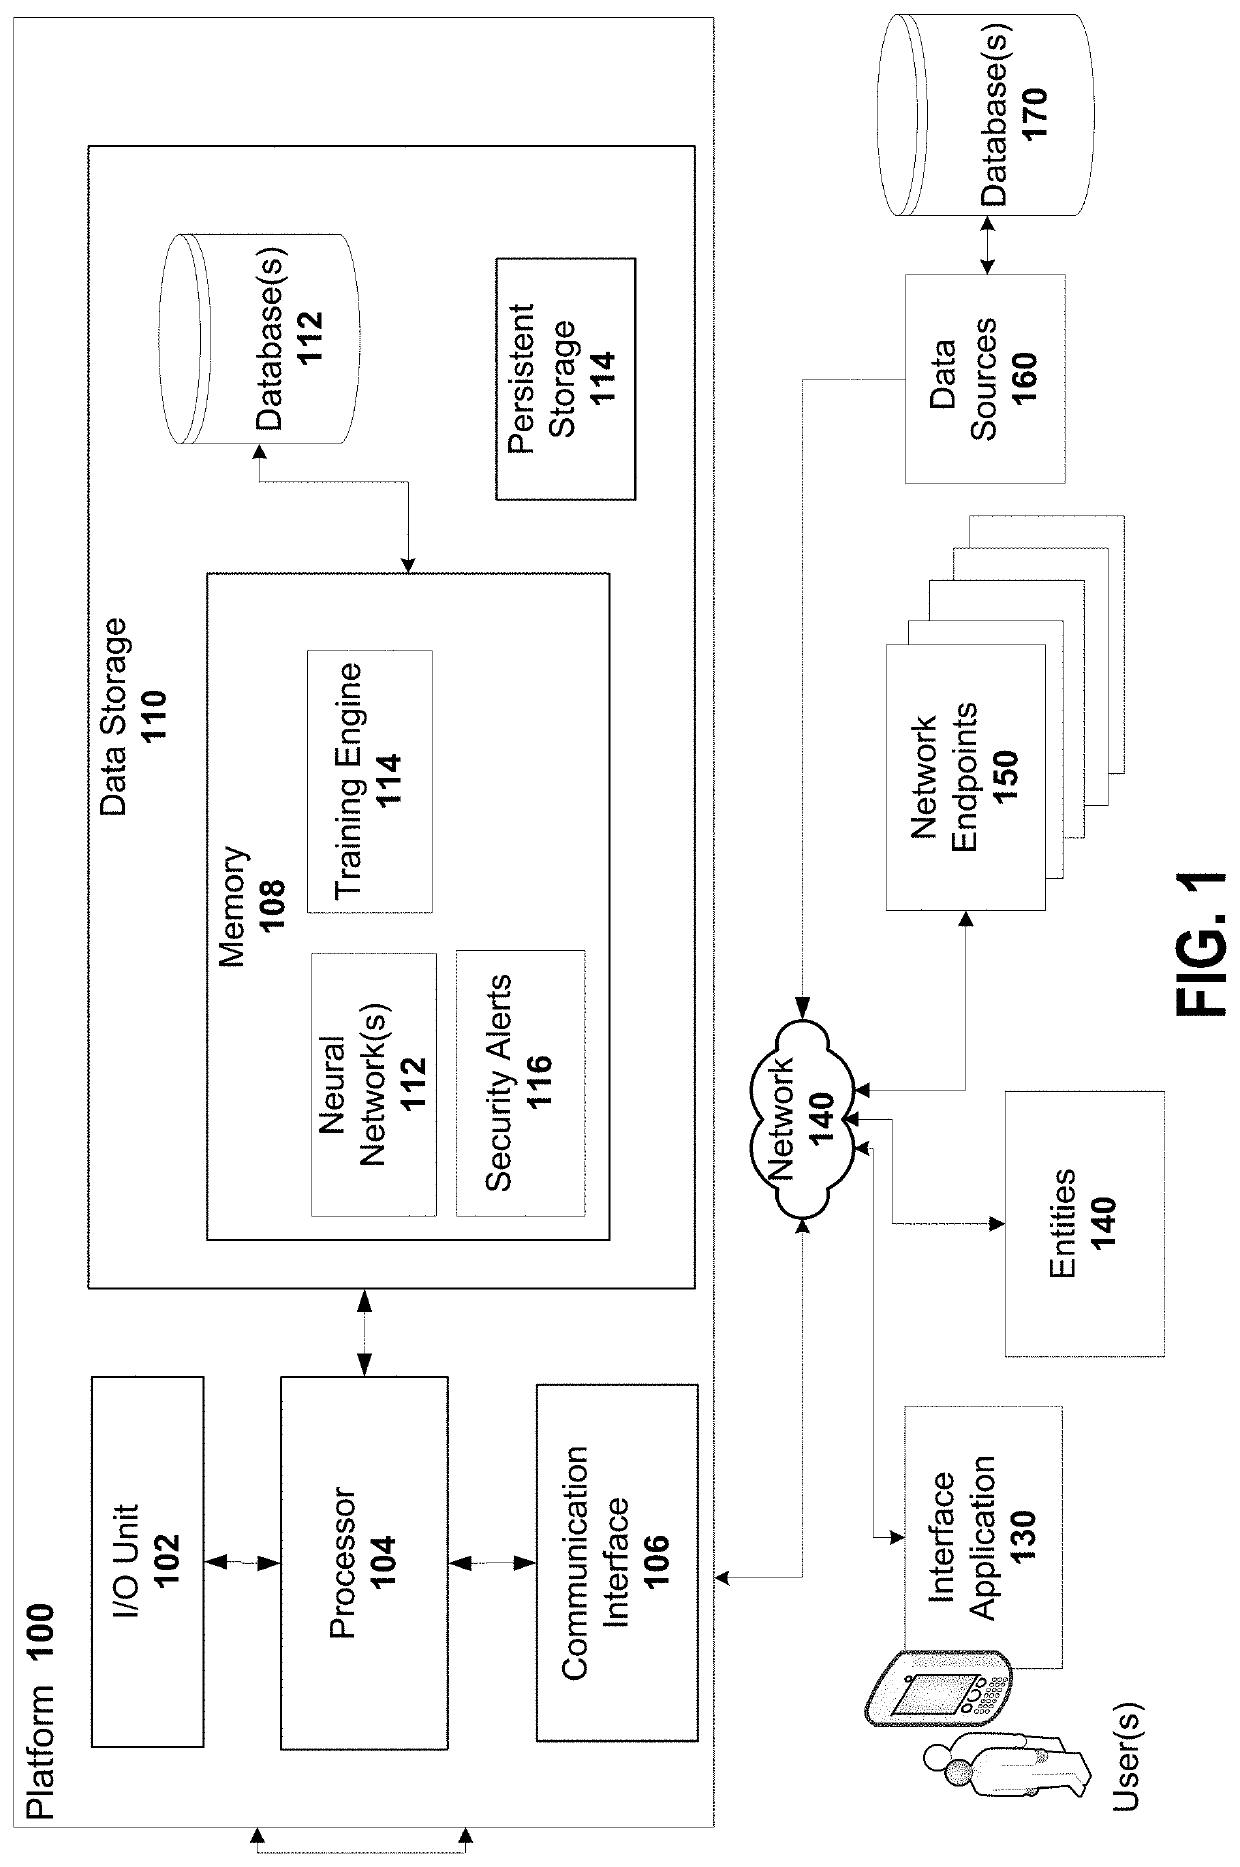 System and method for machine learning architecture with adversarial attack defence